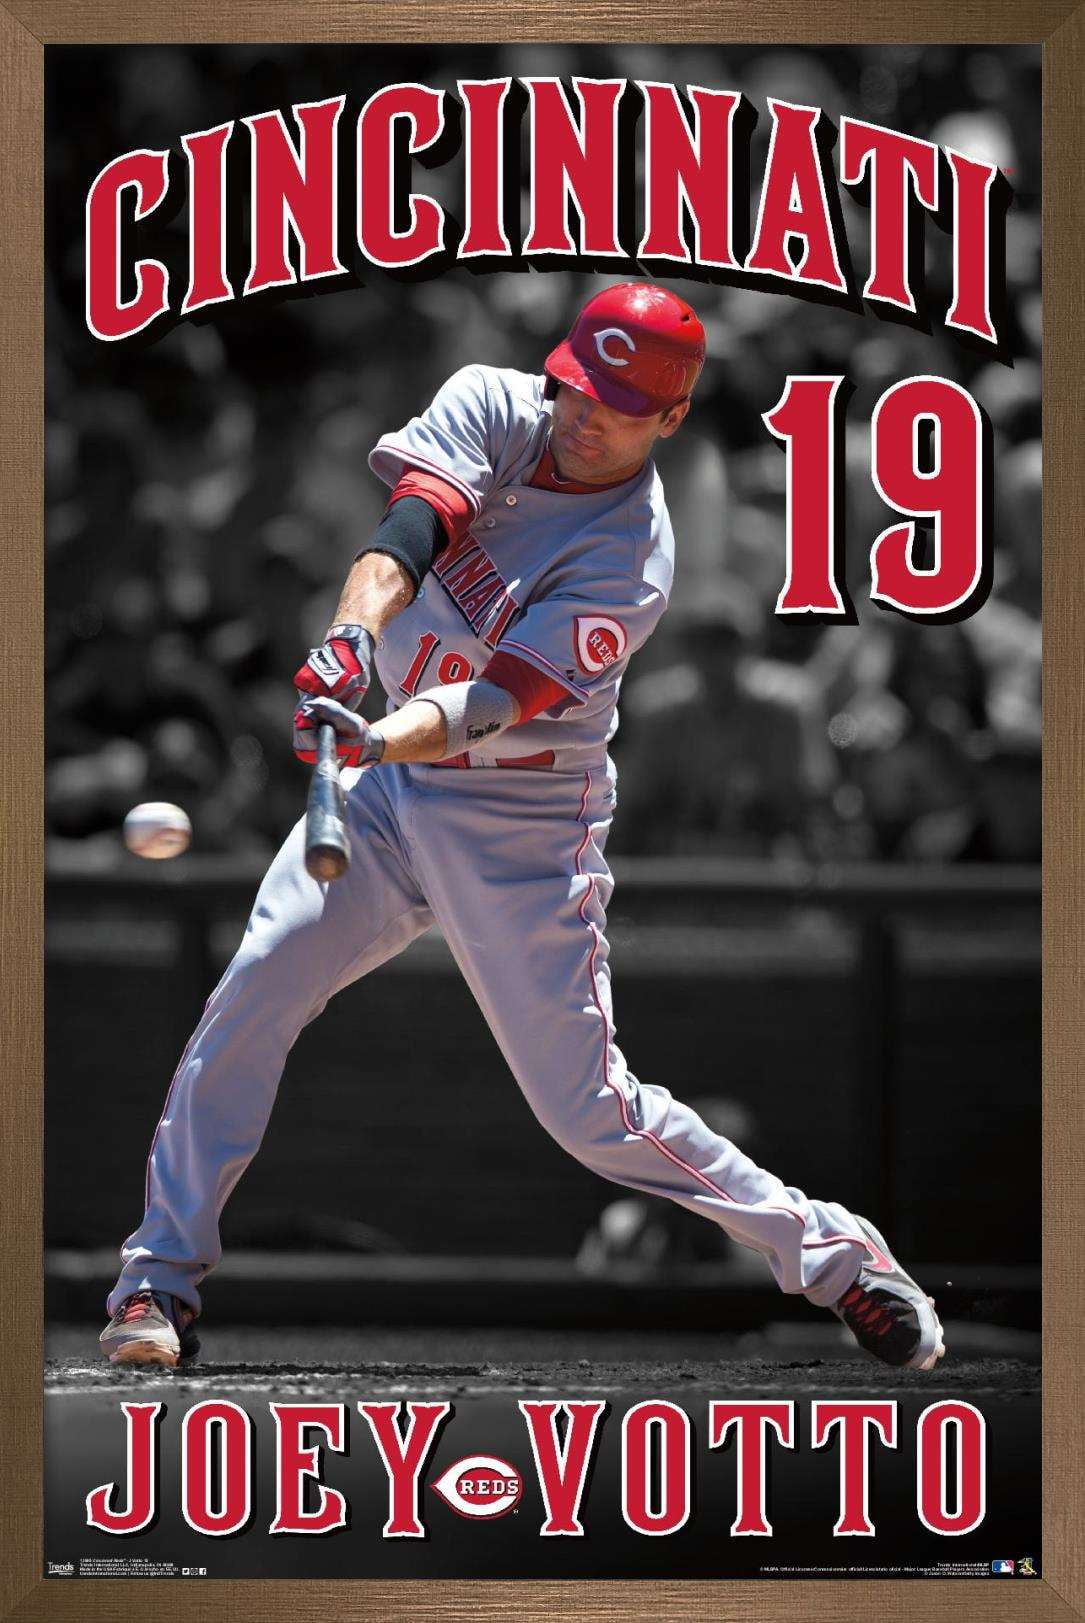 Cincinnati Reds Joey Votto Sports Illustrated Cover Poster